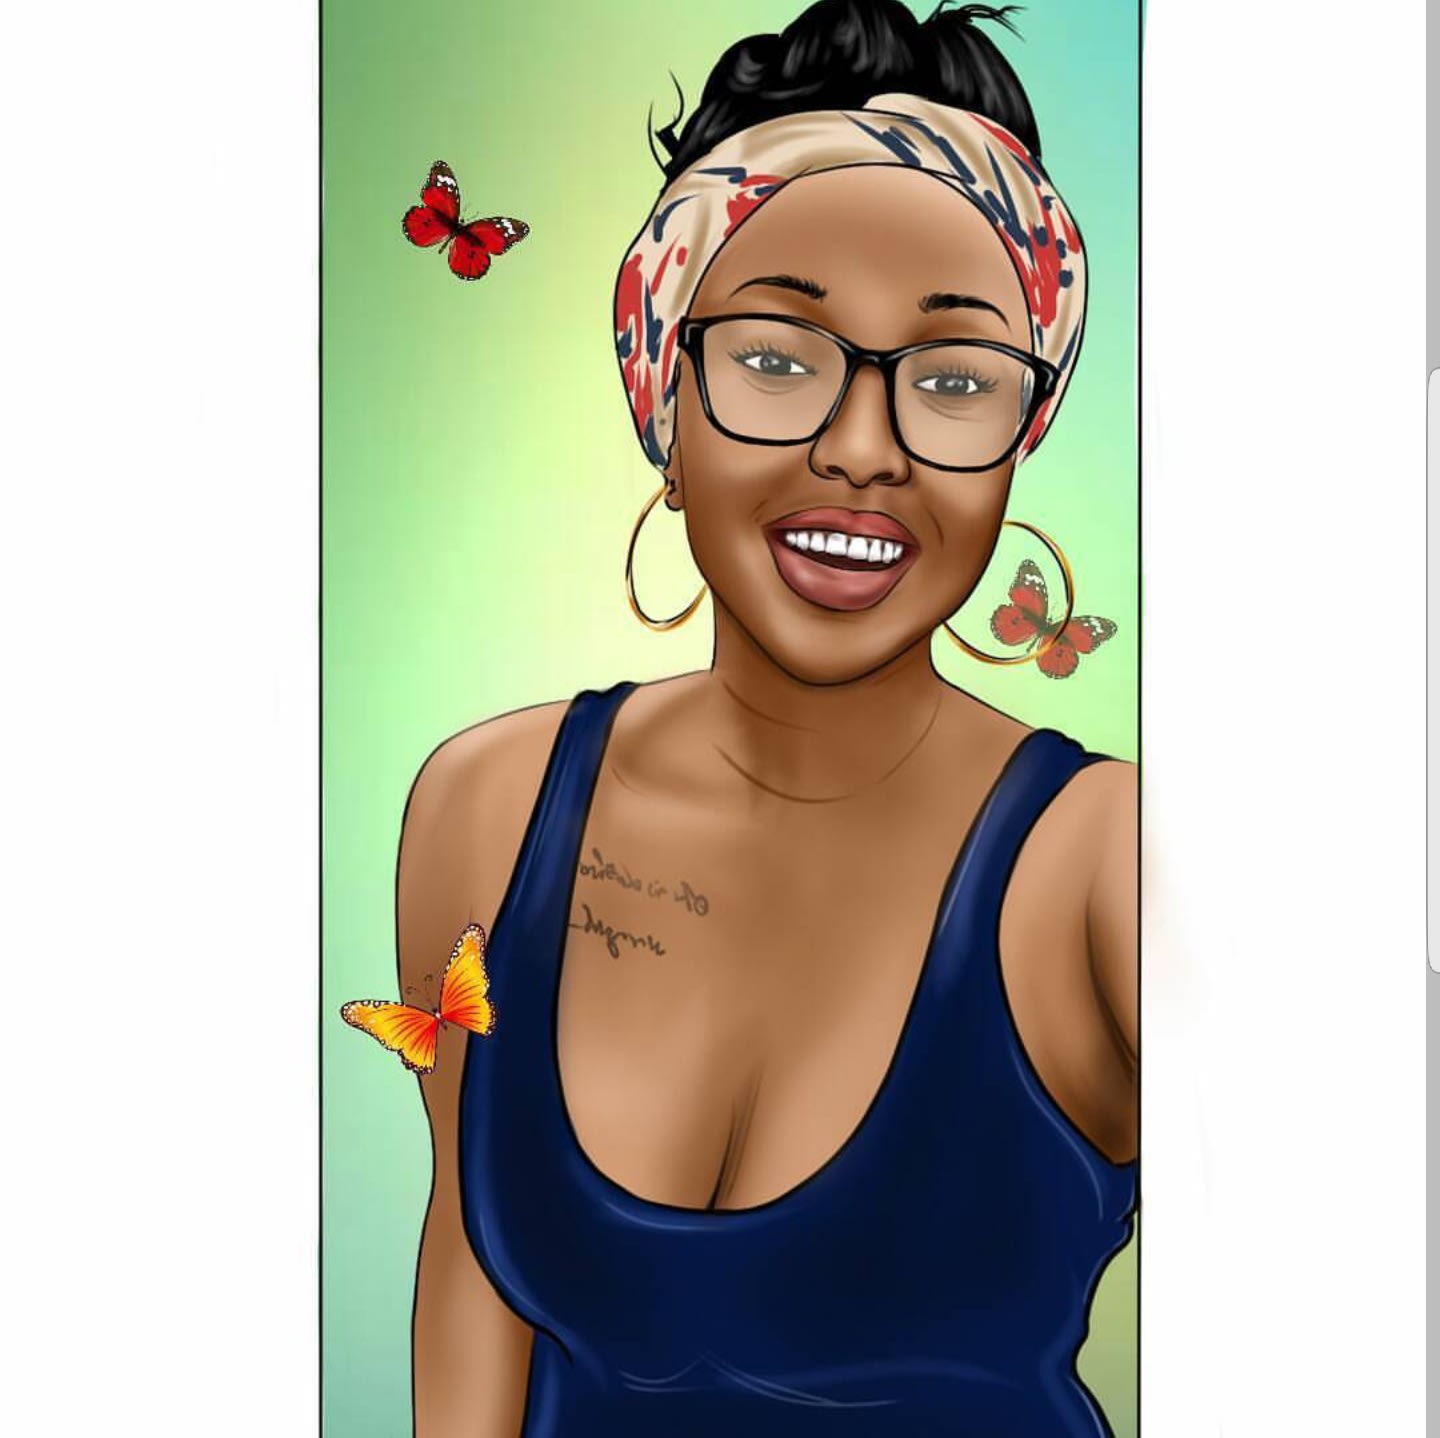 Draw a realistic cartoon character of your picture by Lilpraize | Fiverr